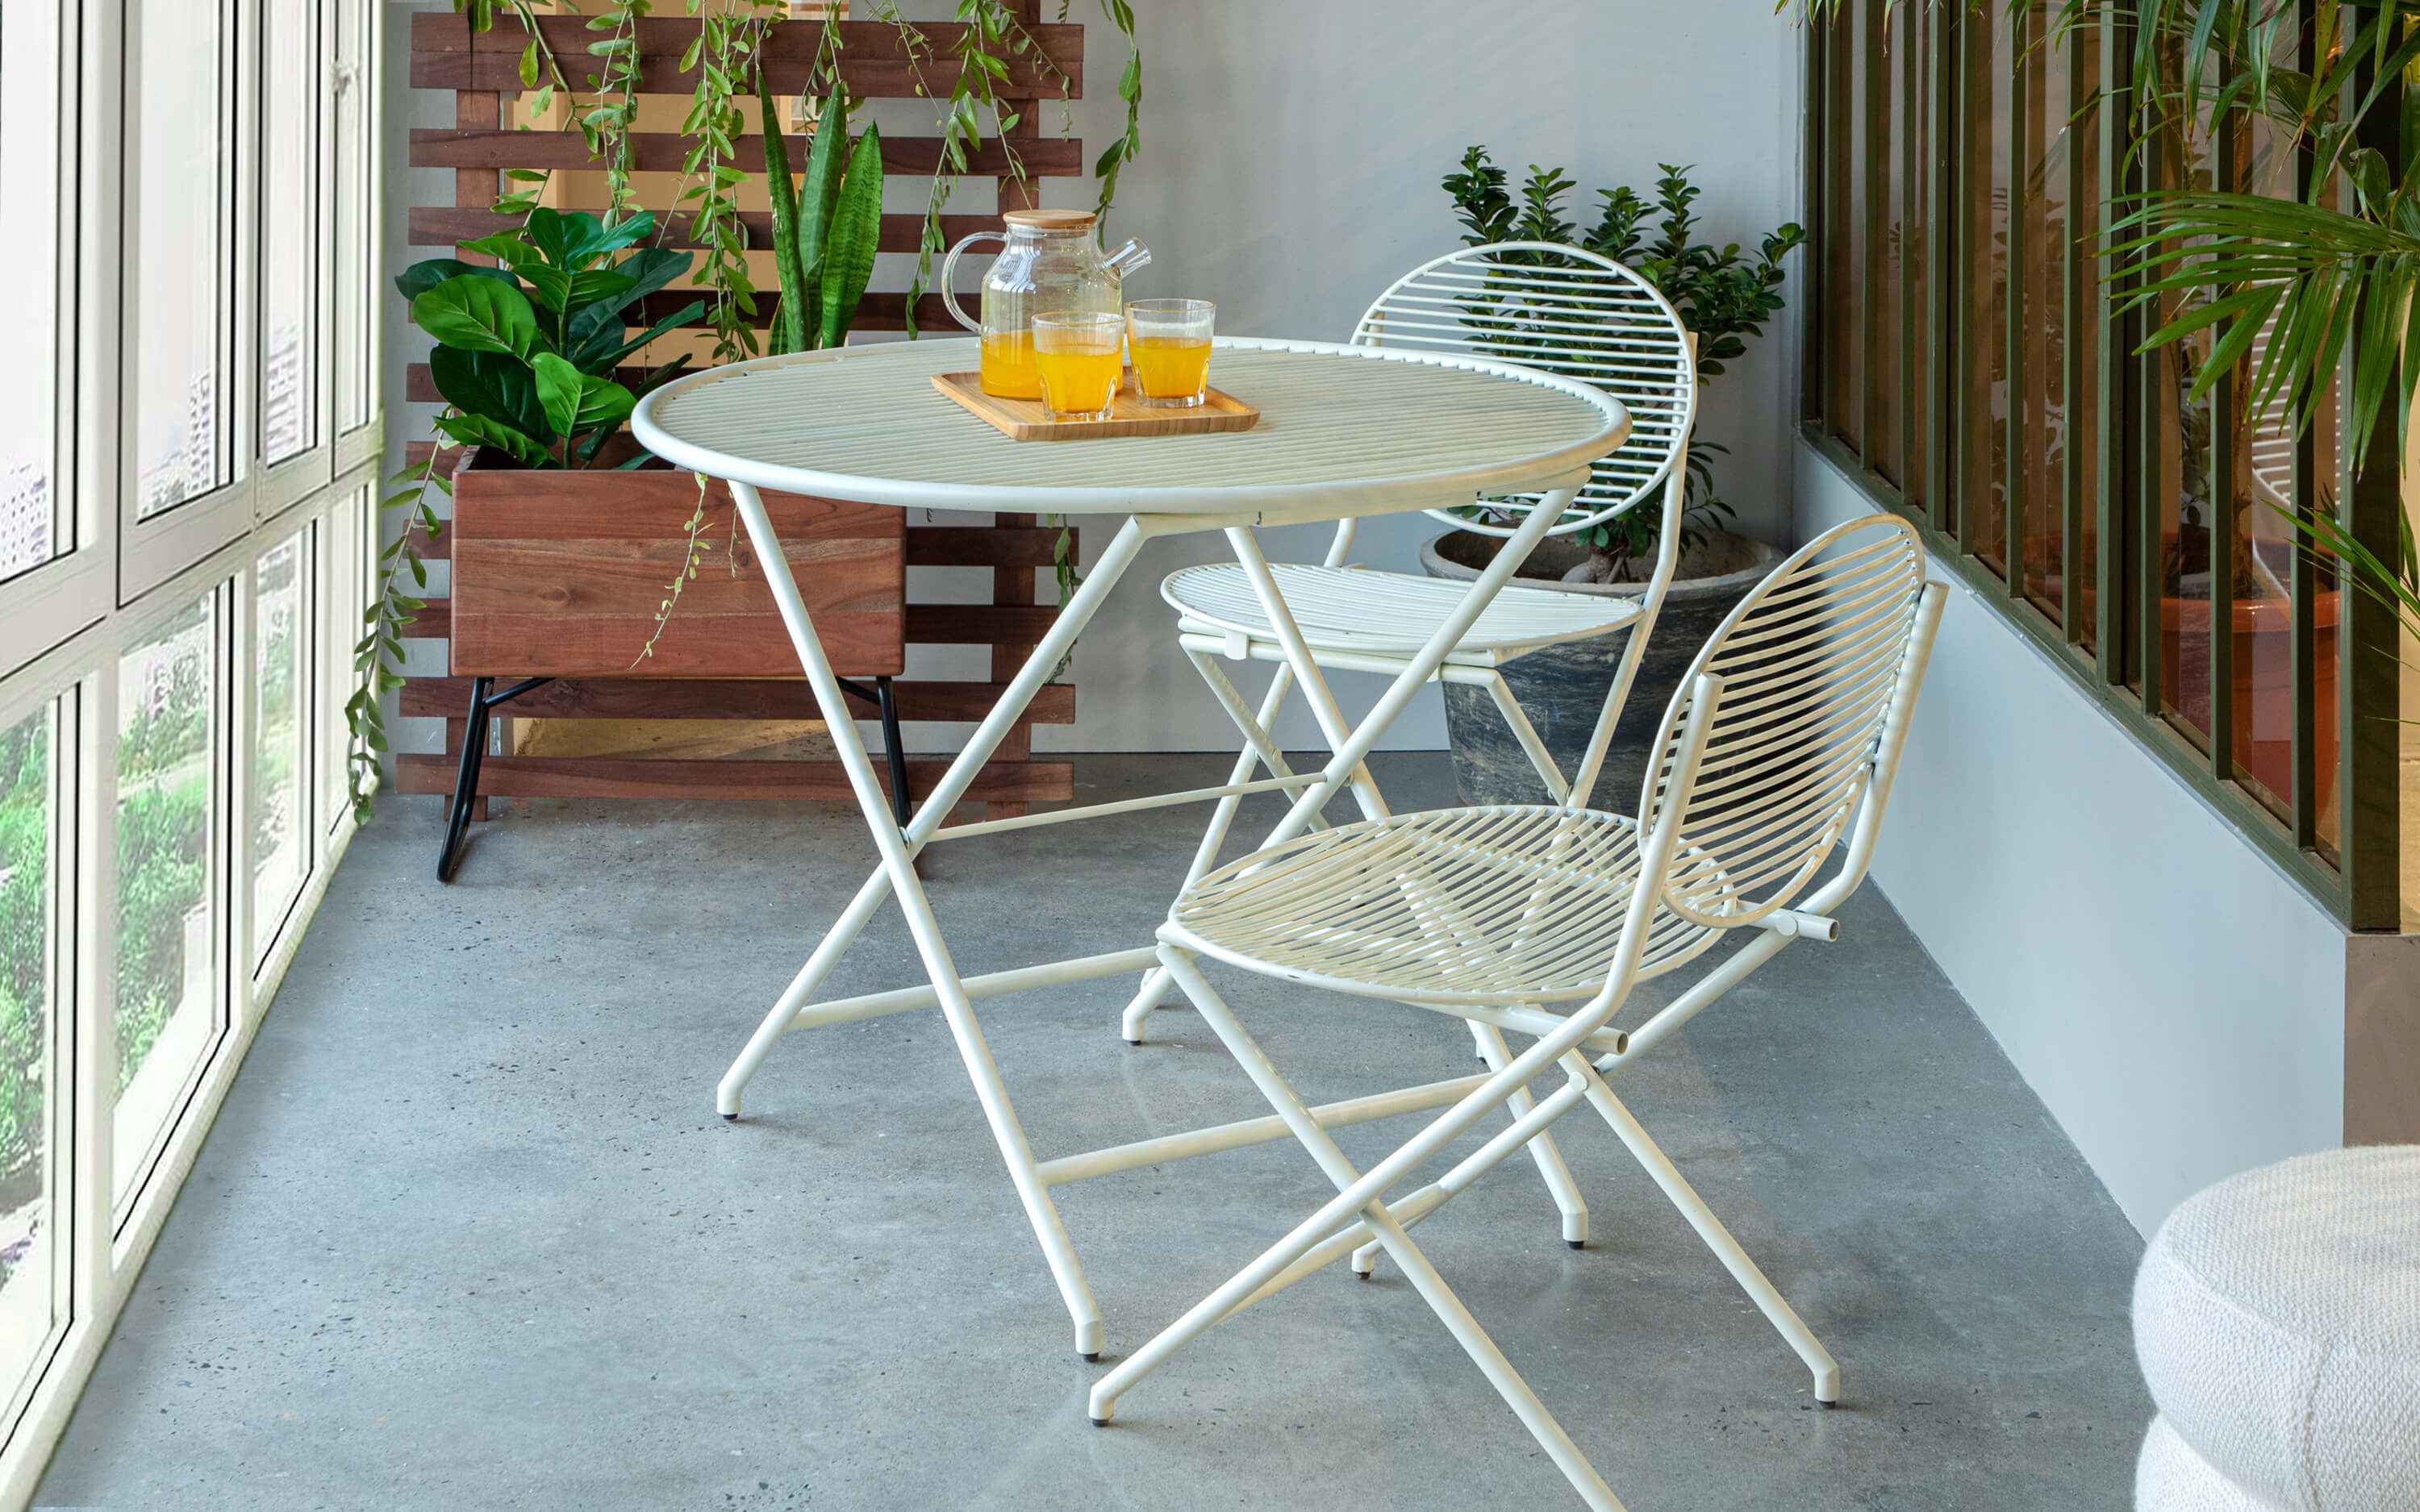 Patio Off White Table Set With 2 Chairs